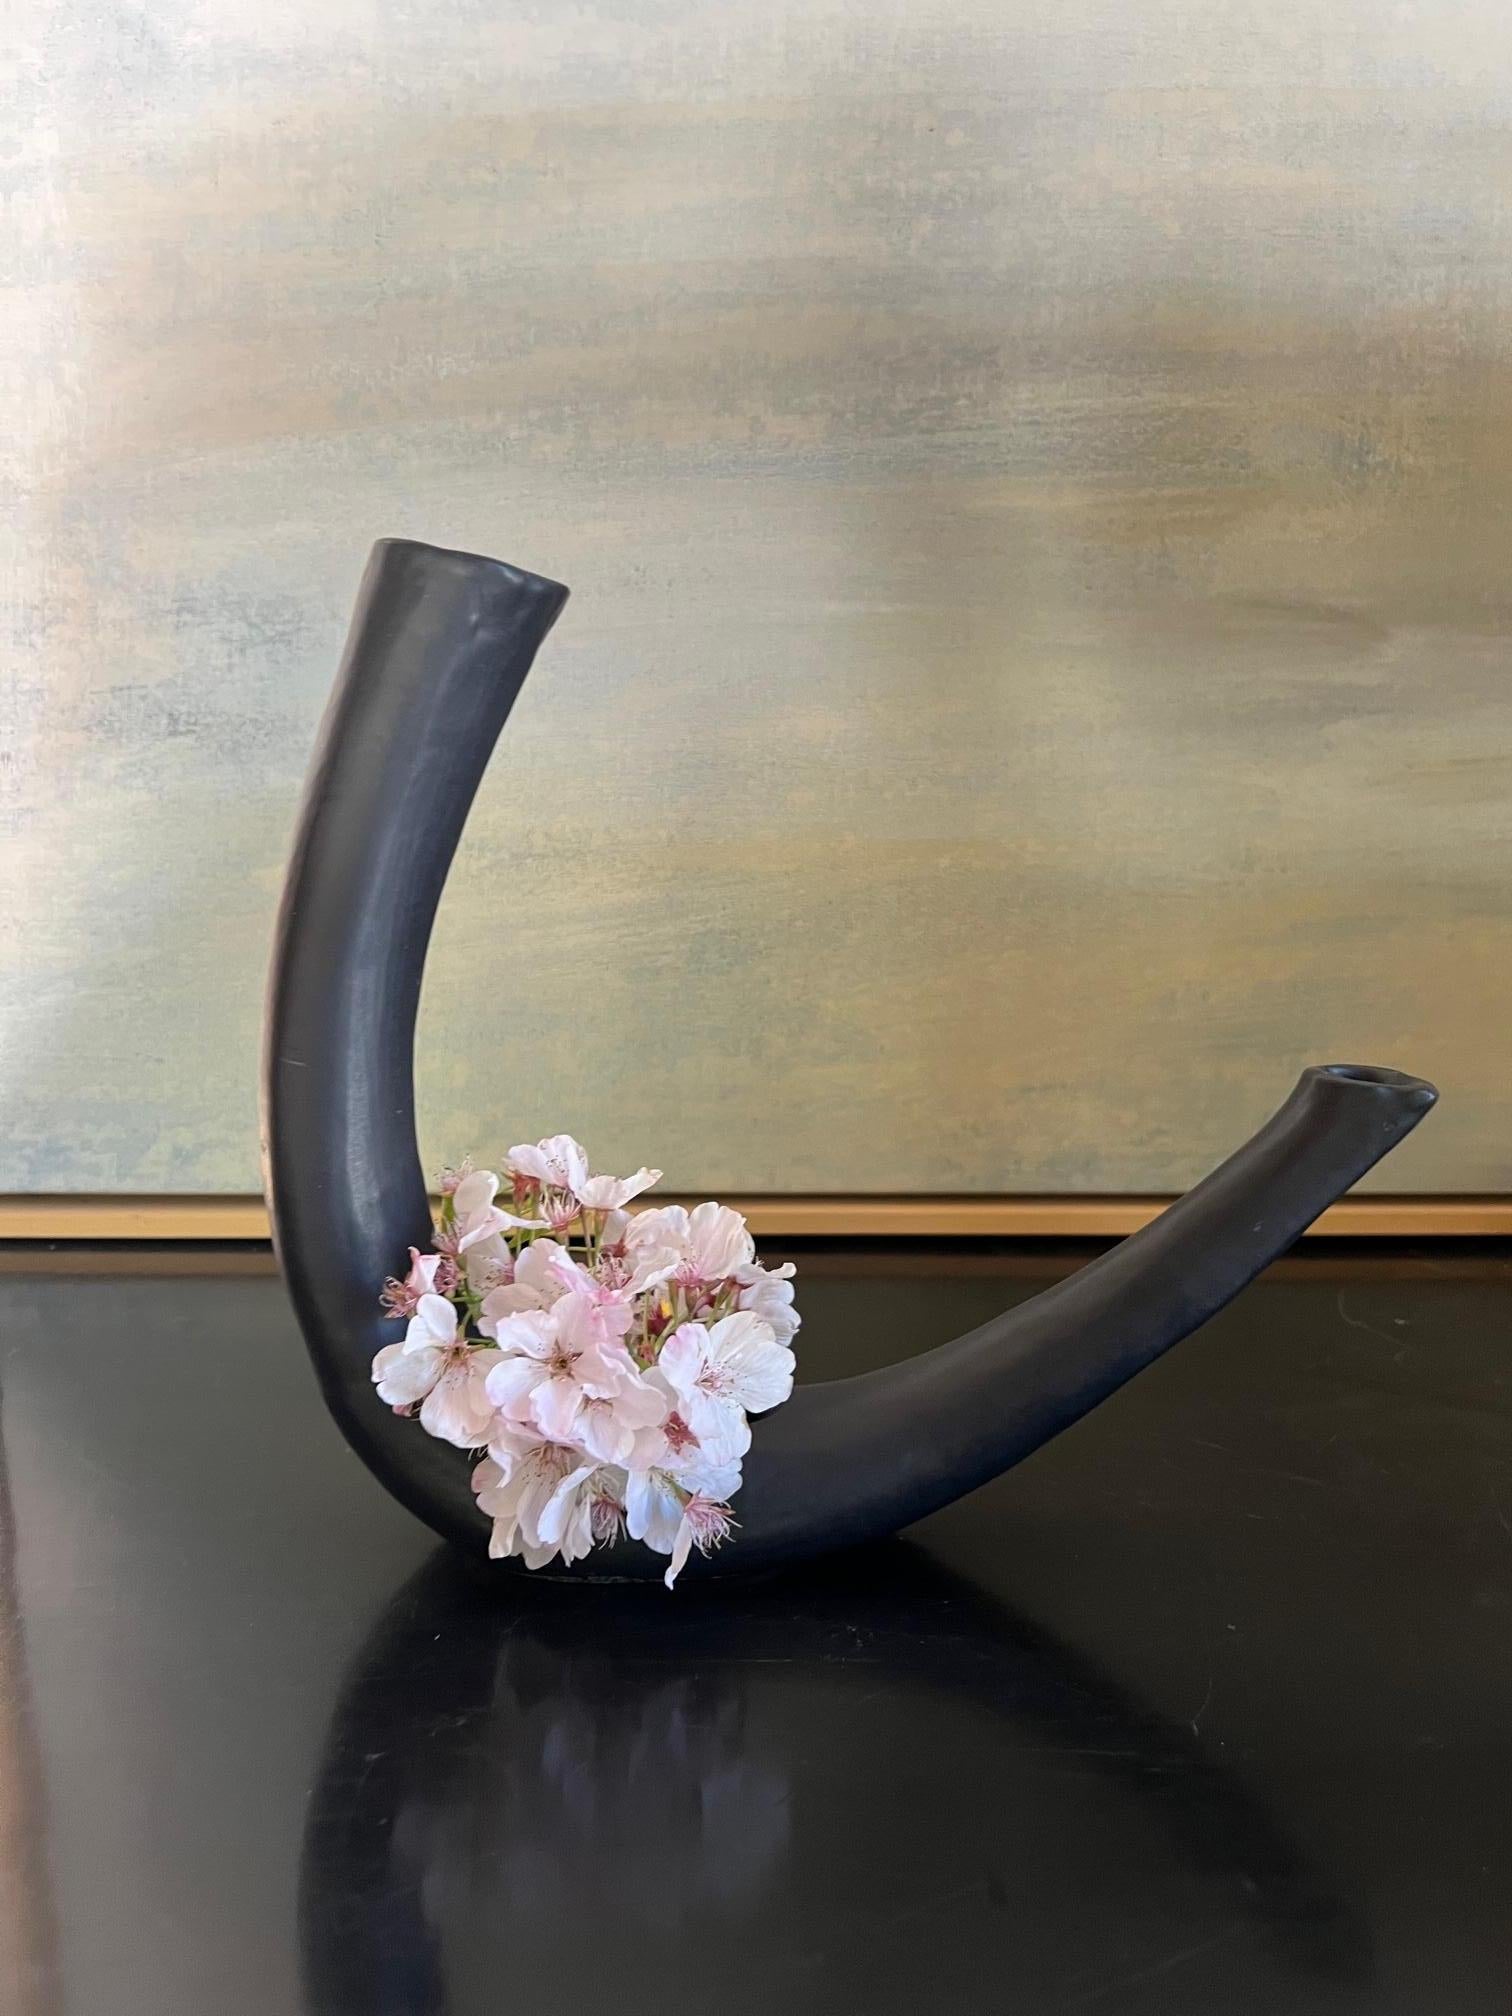 Hand made Ikebana vase, glazed in a matte black for a sophisticated look. The vase is horn shaped with a shallow hole in the bottom.